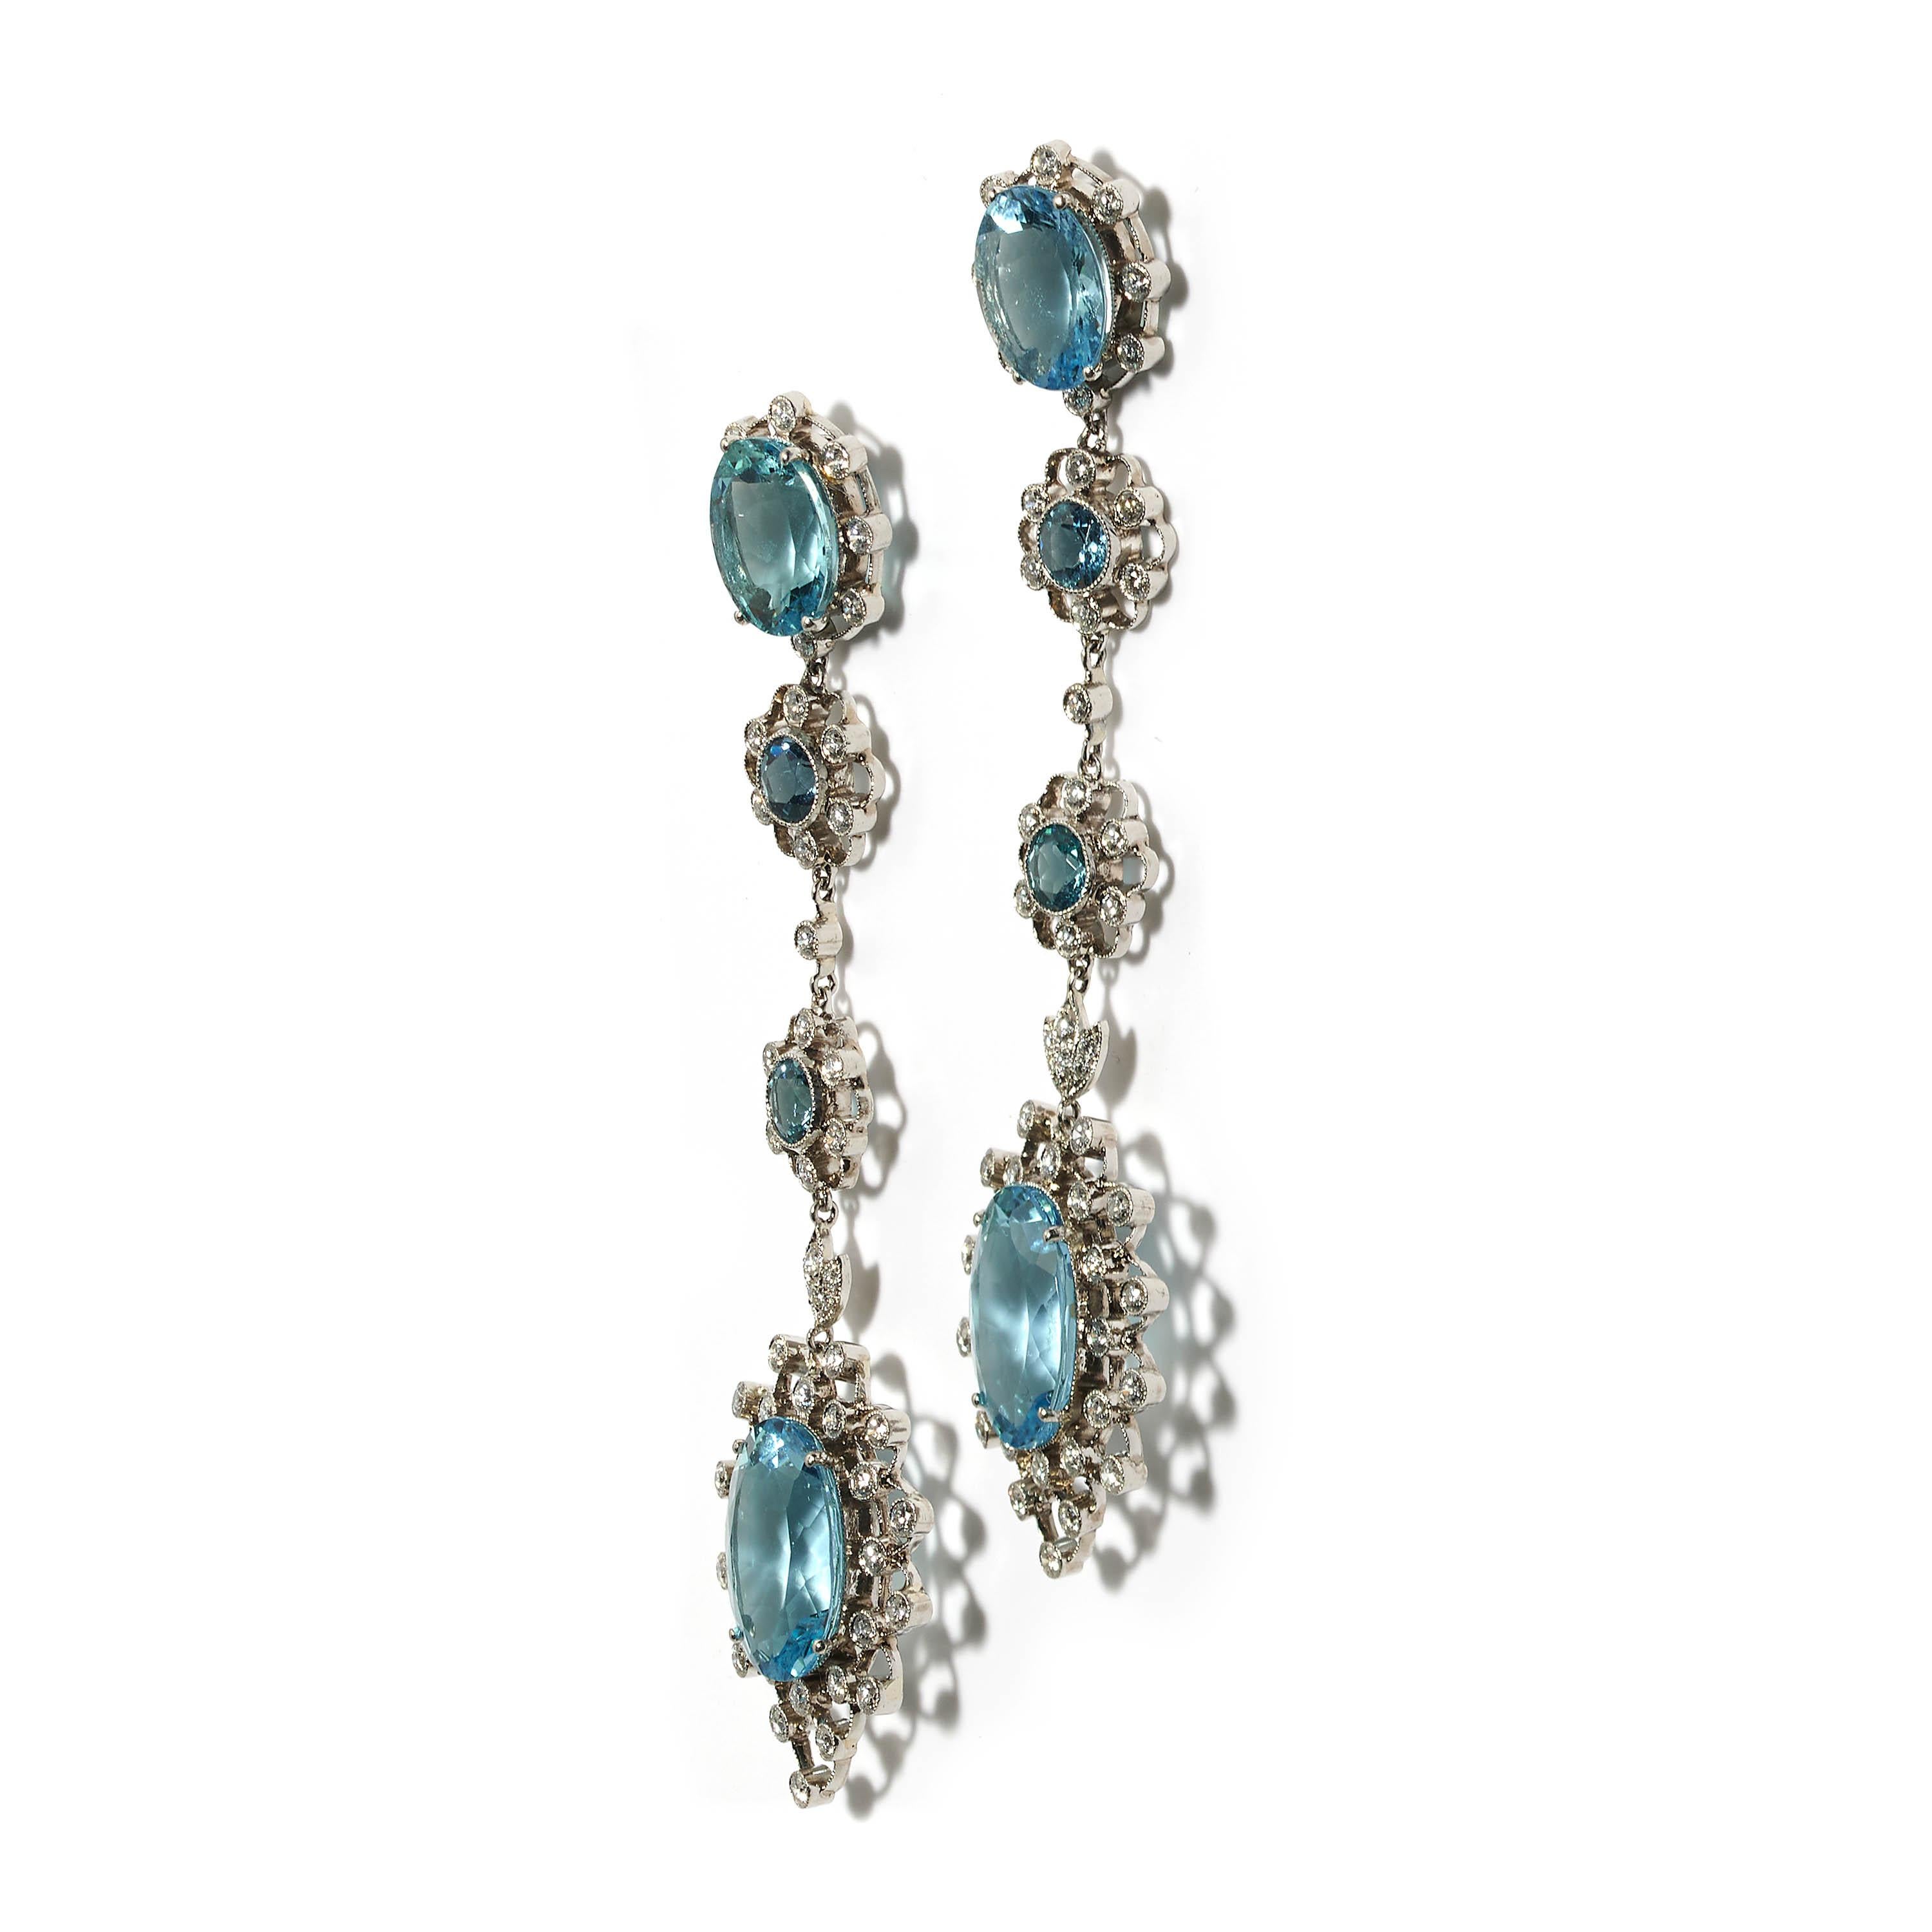 A modern pair of drop earrings consisting of four separate aquamarine and diamond cluster sections, with an estimated total weight of 17.37 carats of round and oval-cut aquamarines, and an estimated total weight of 1.79 carats of round,